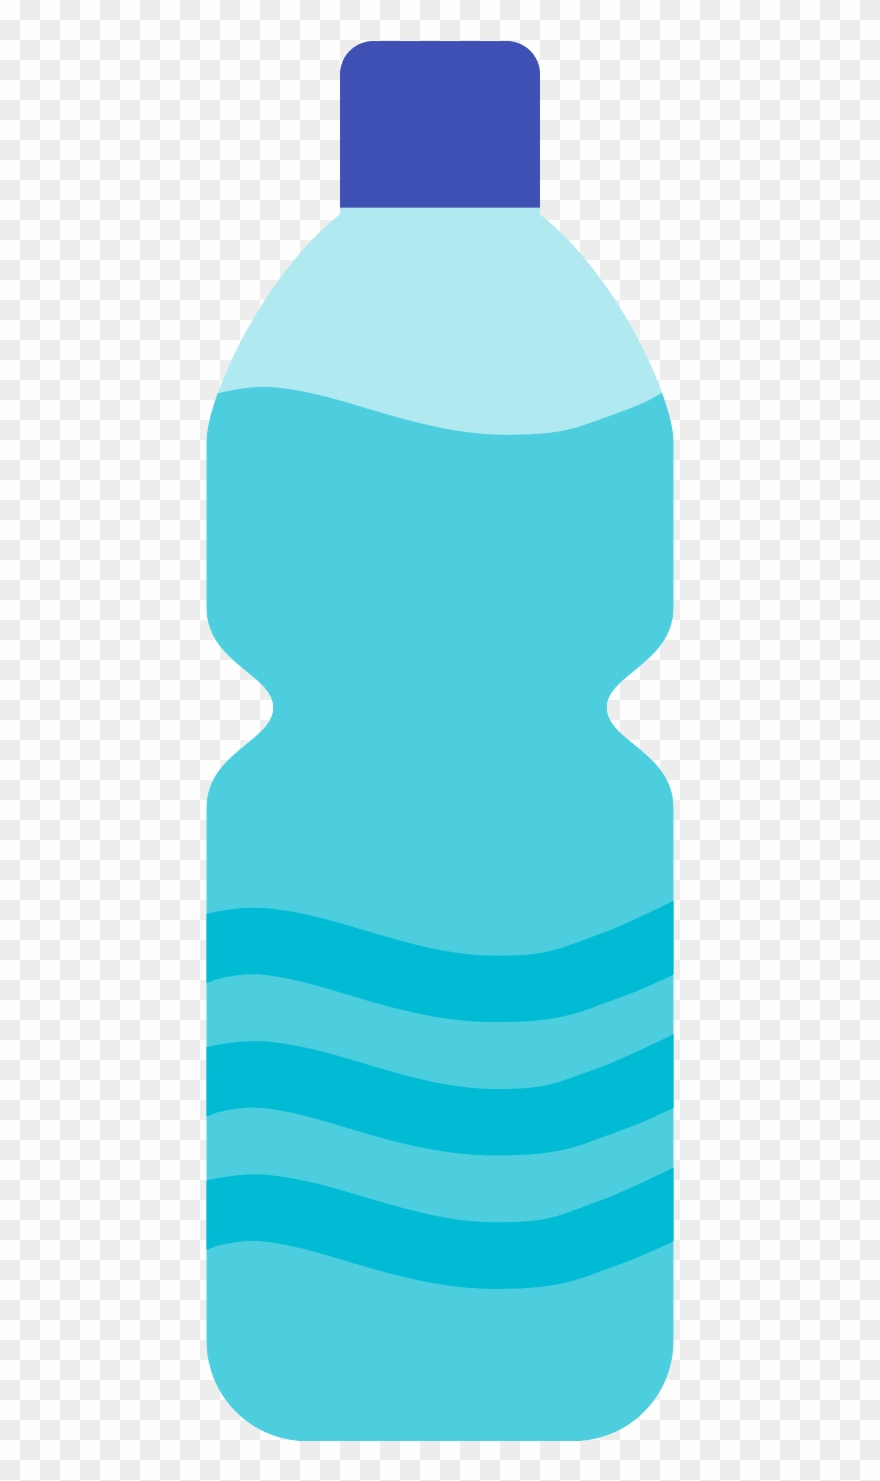 Bottle water icon.